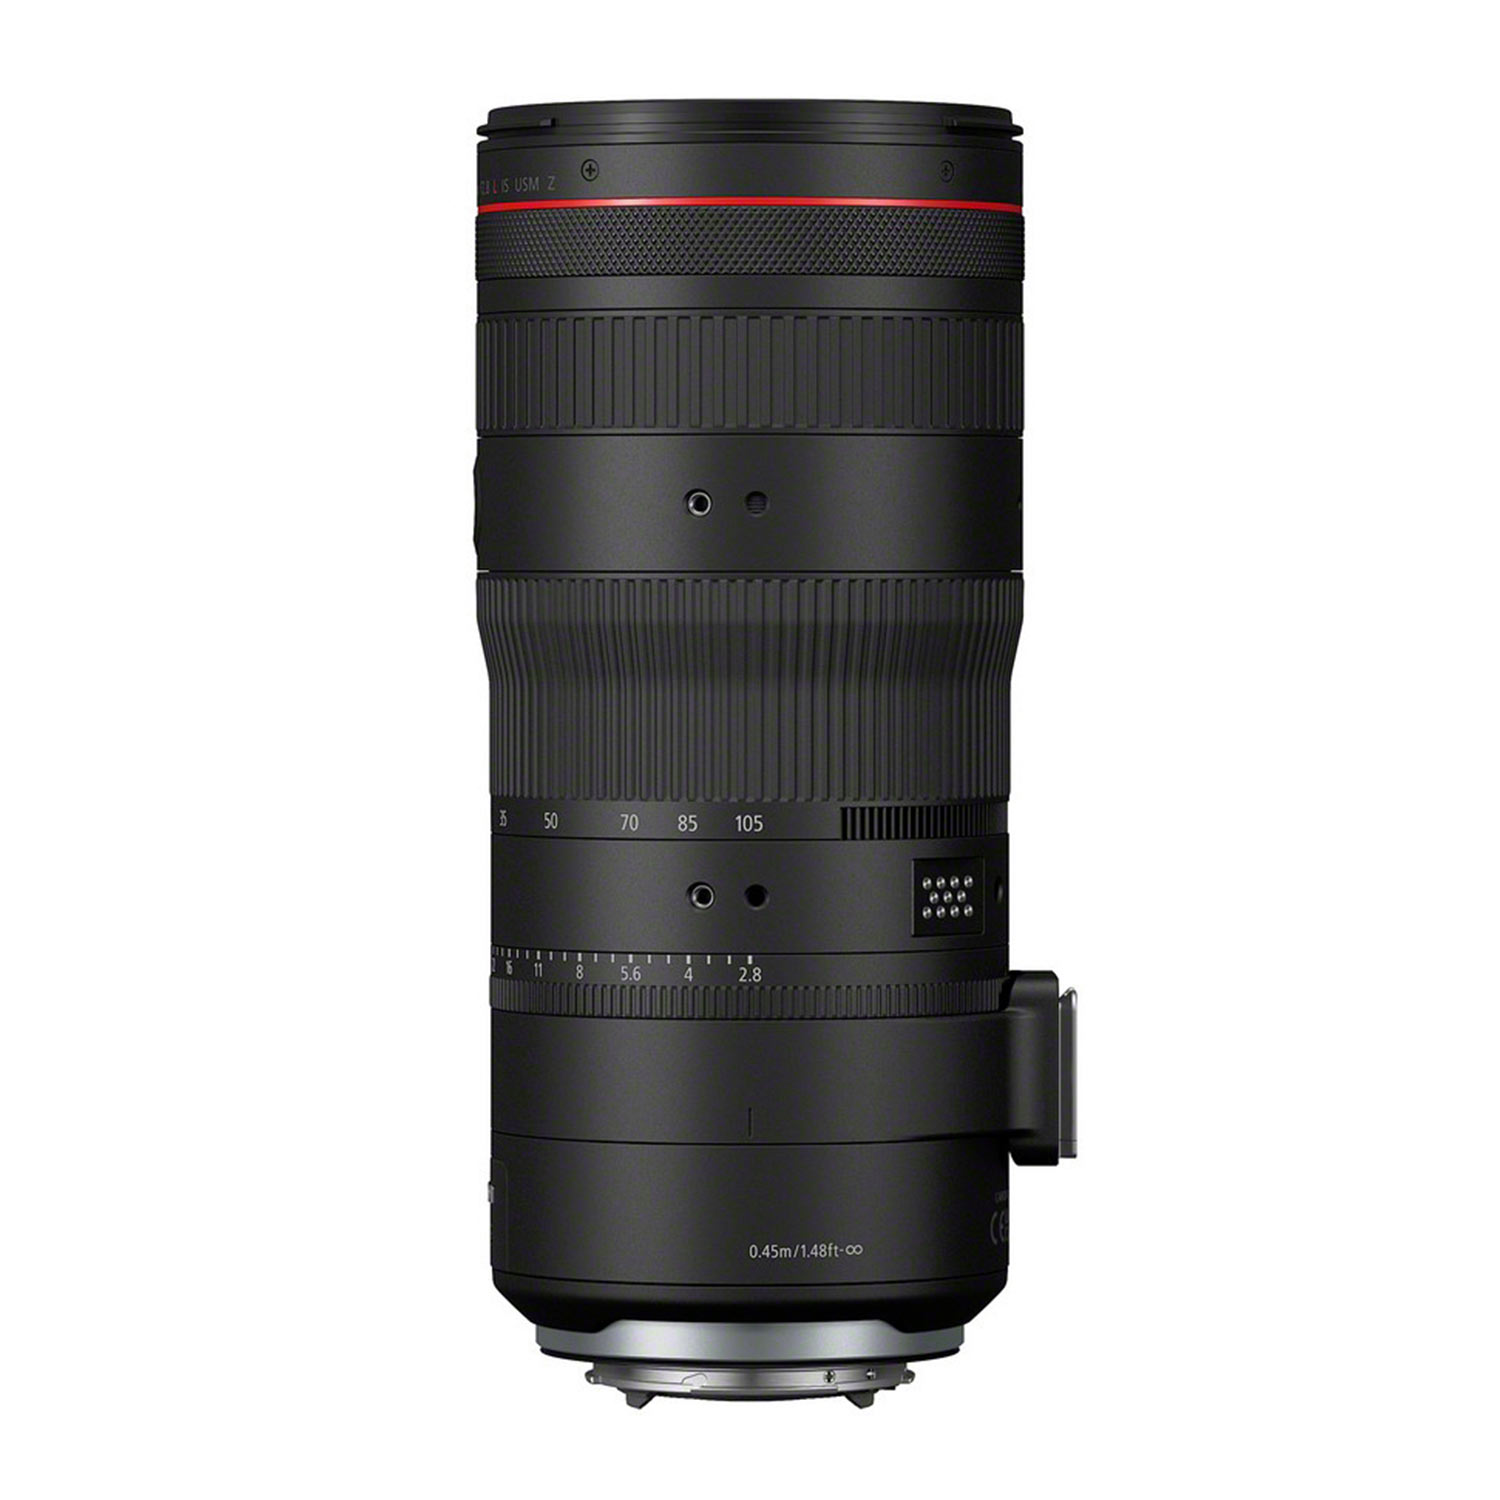 Canon RF 24-105mm 1:2,8 L IS USM Z